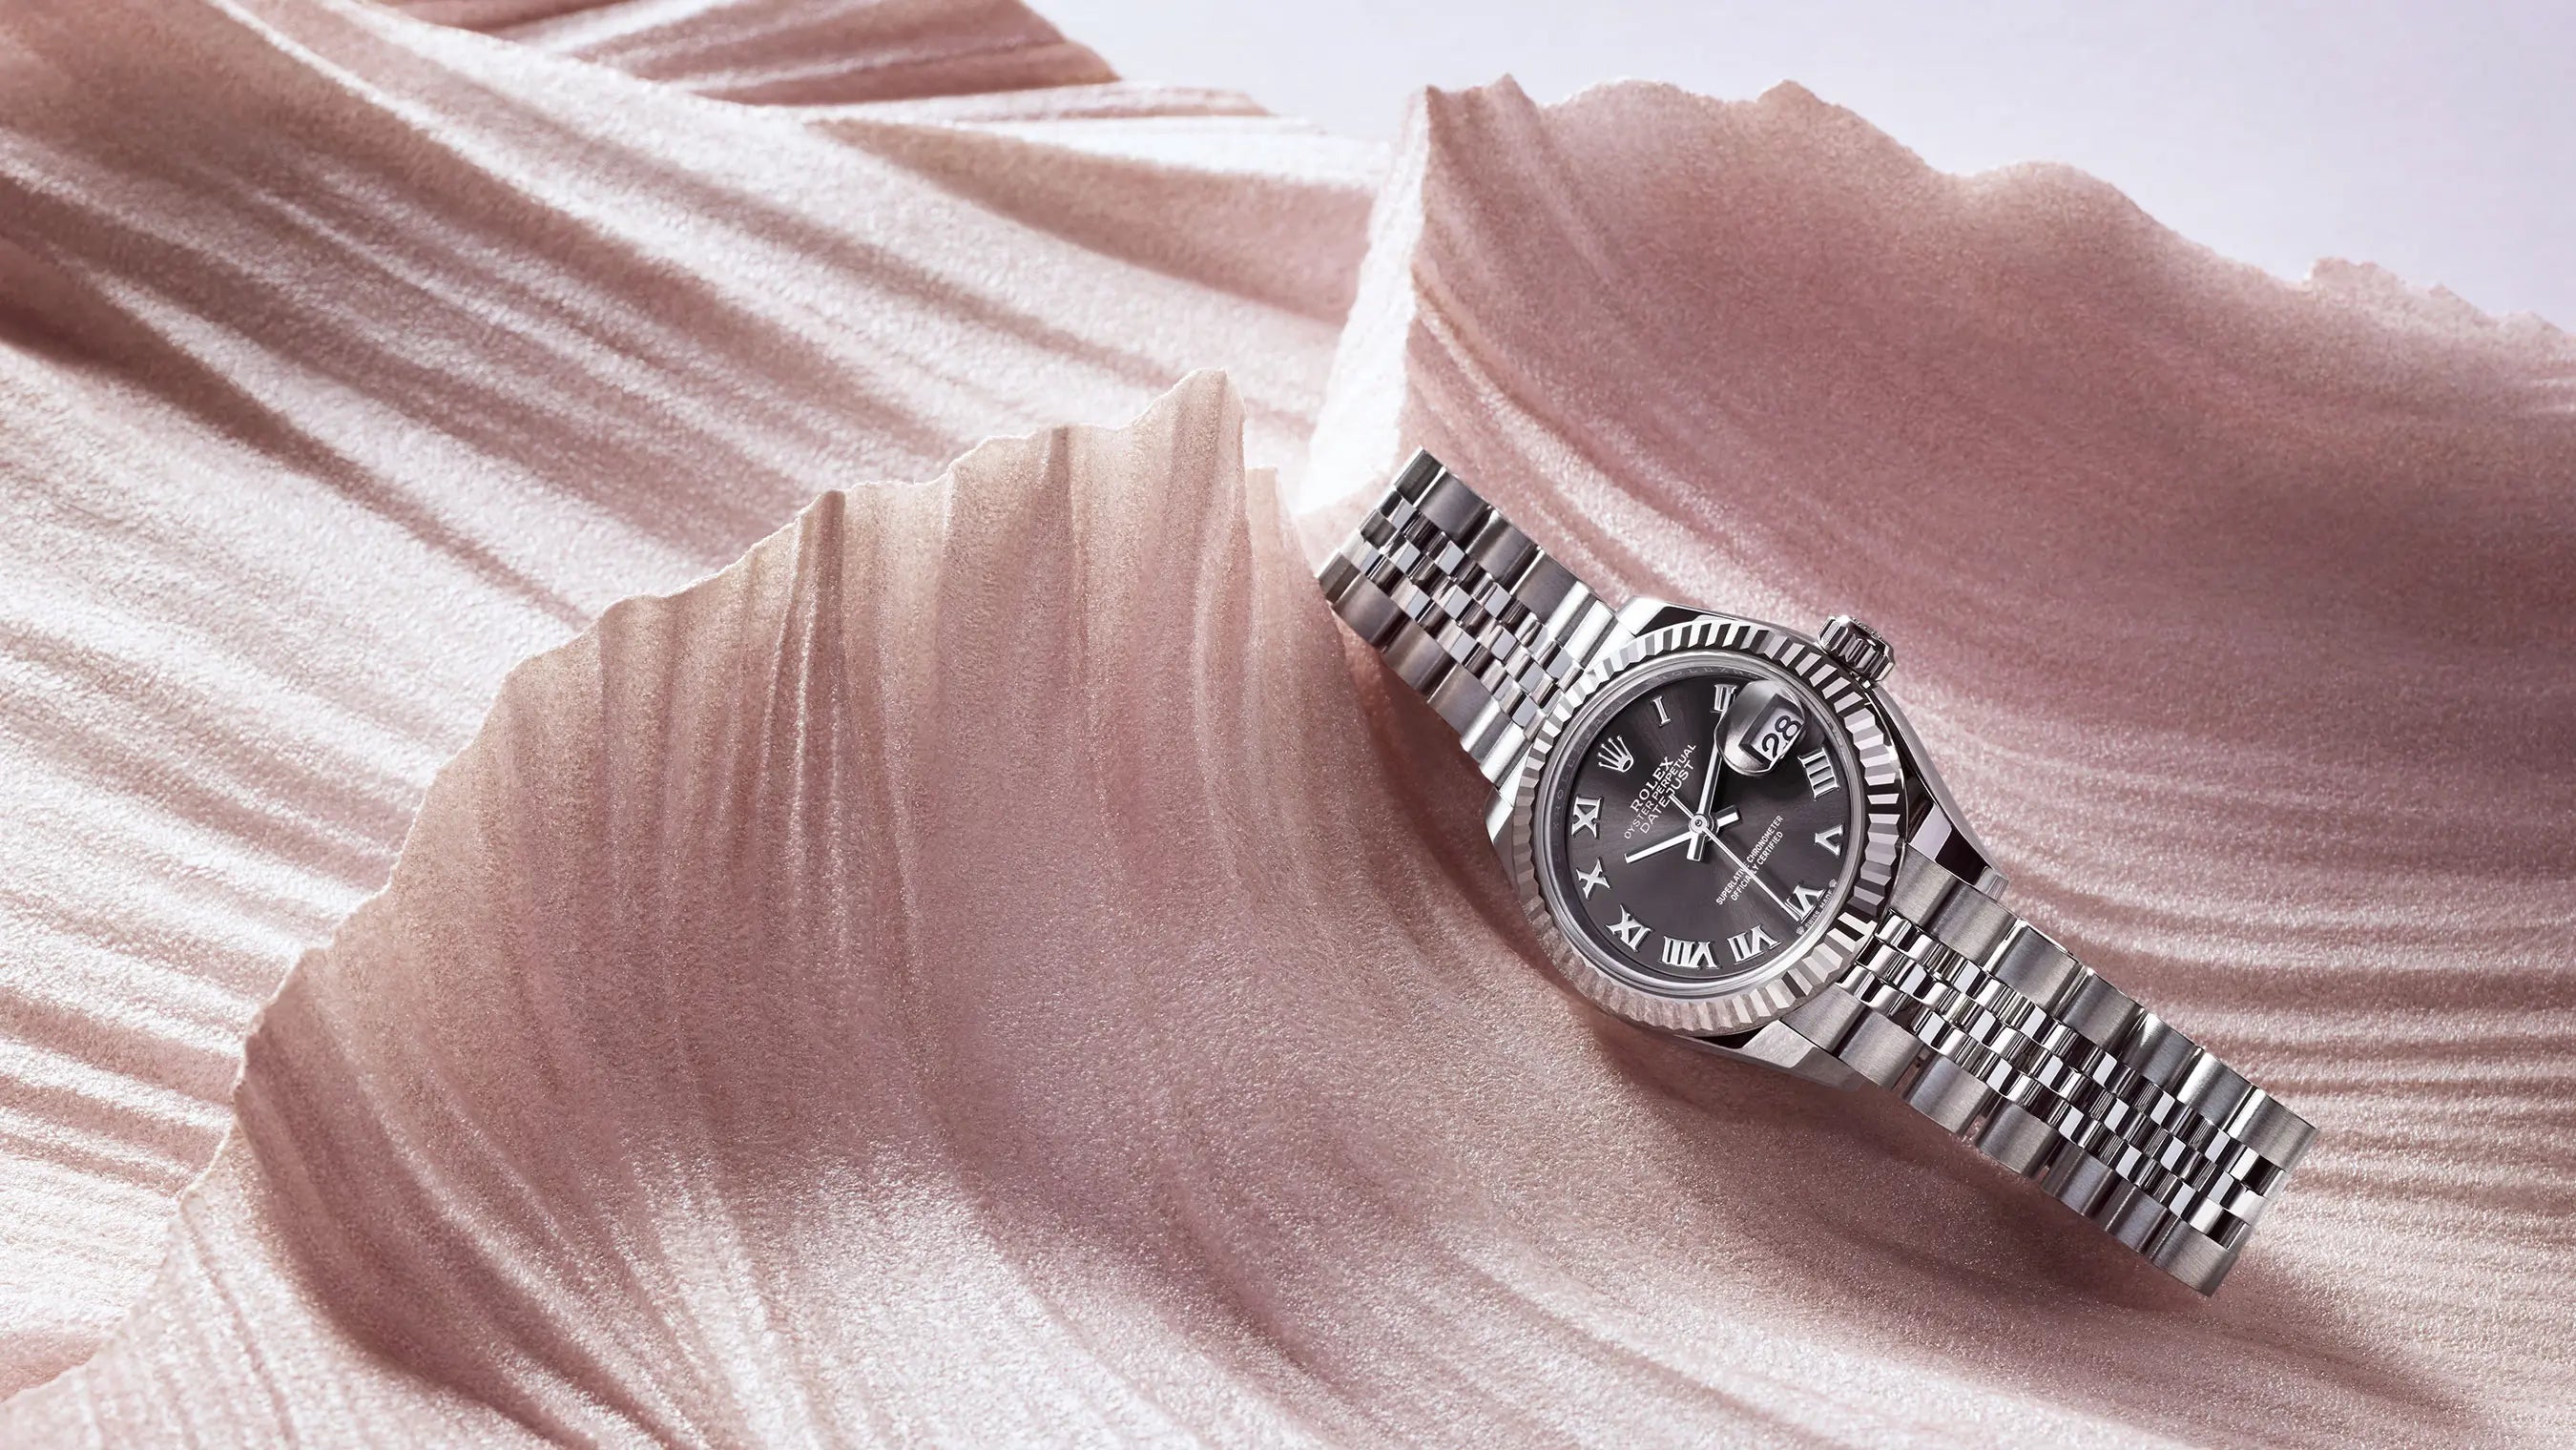 The Audacity of Excellence, The Lady-Datejust | Howard Fine Jewellers - Official Rolex Retailer